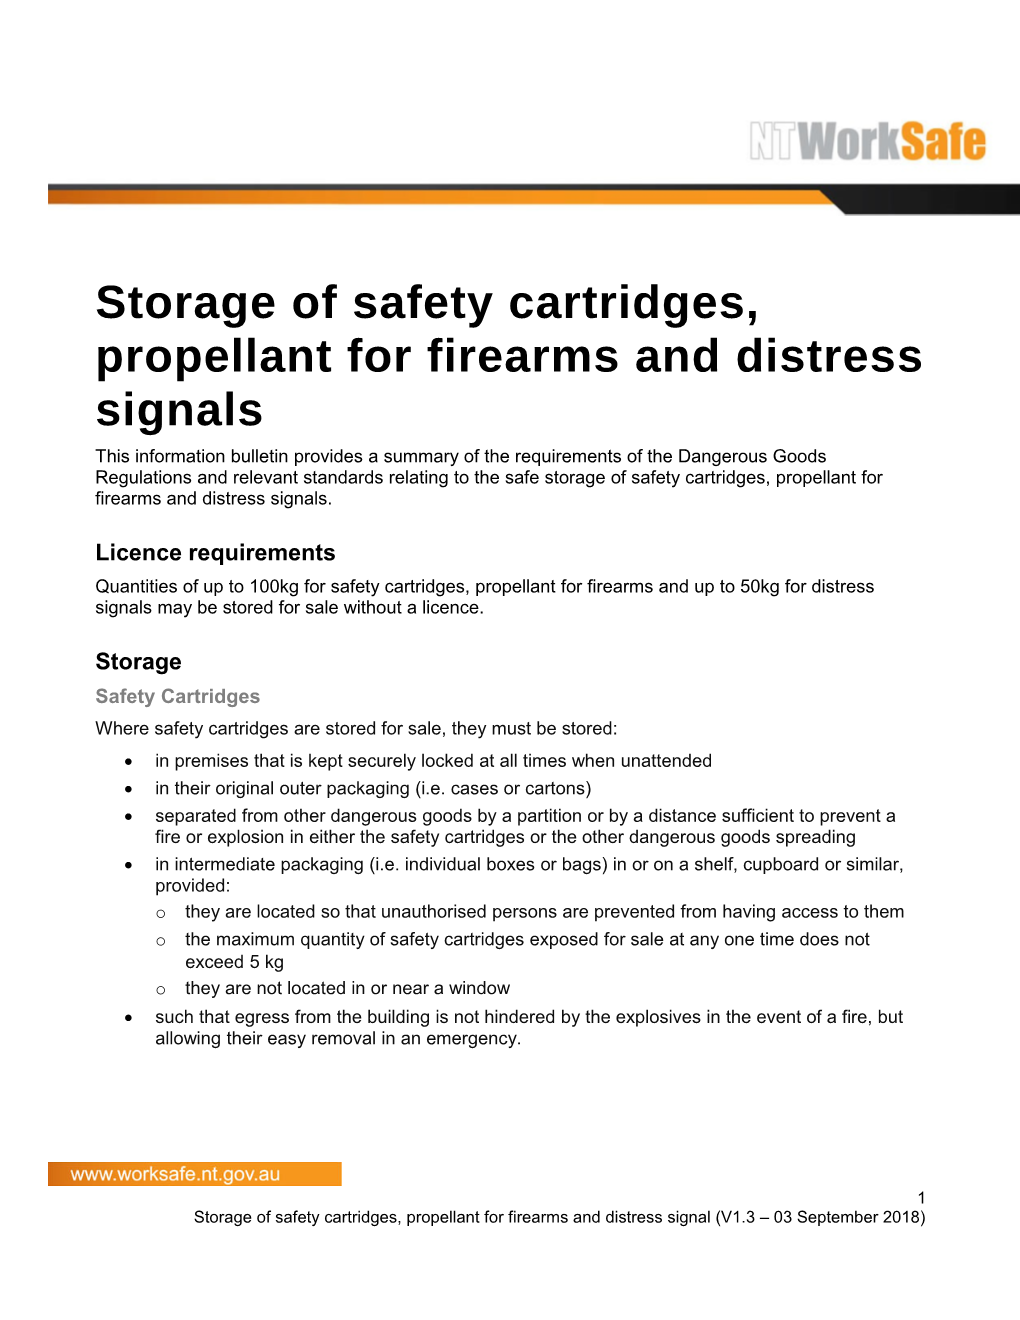 Storage of Safety Cartridges, Propellant for Firearms and Distress Signals